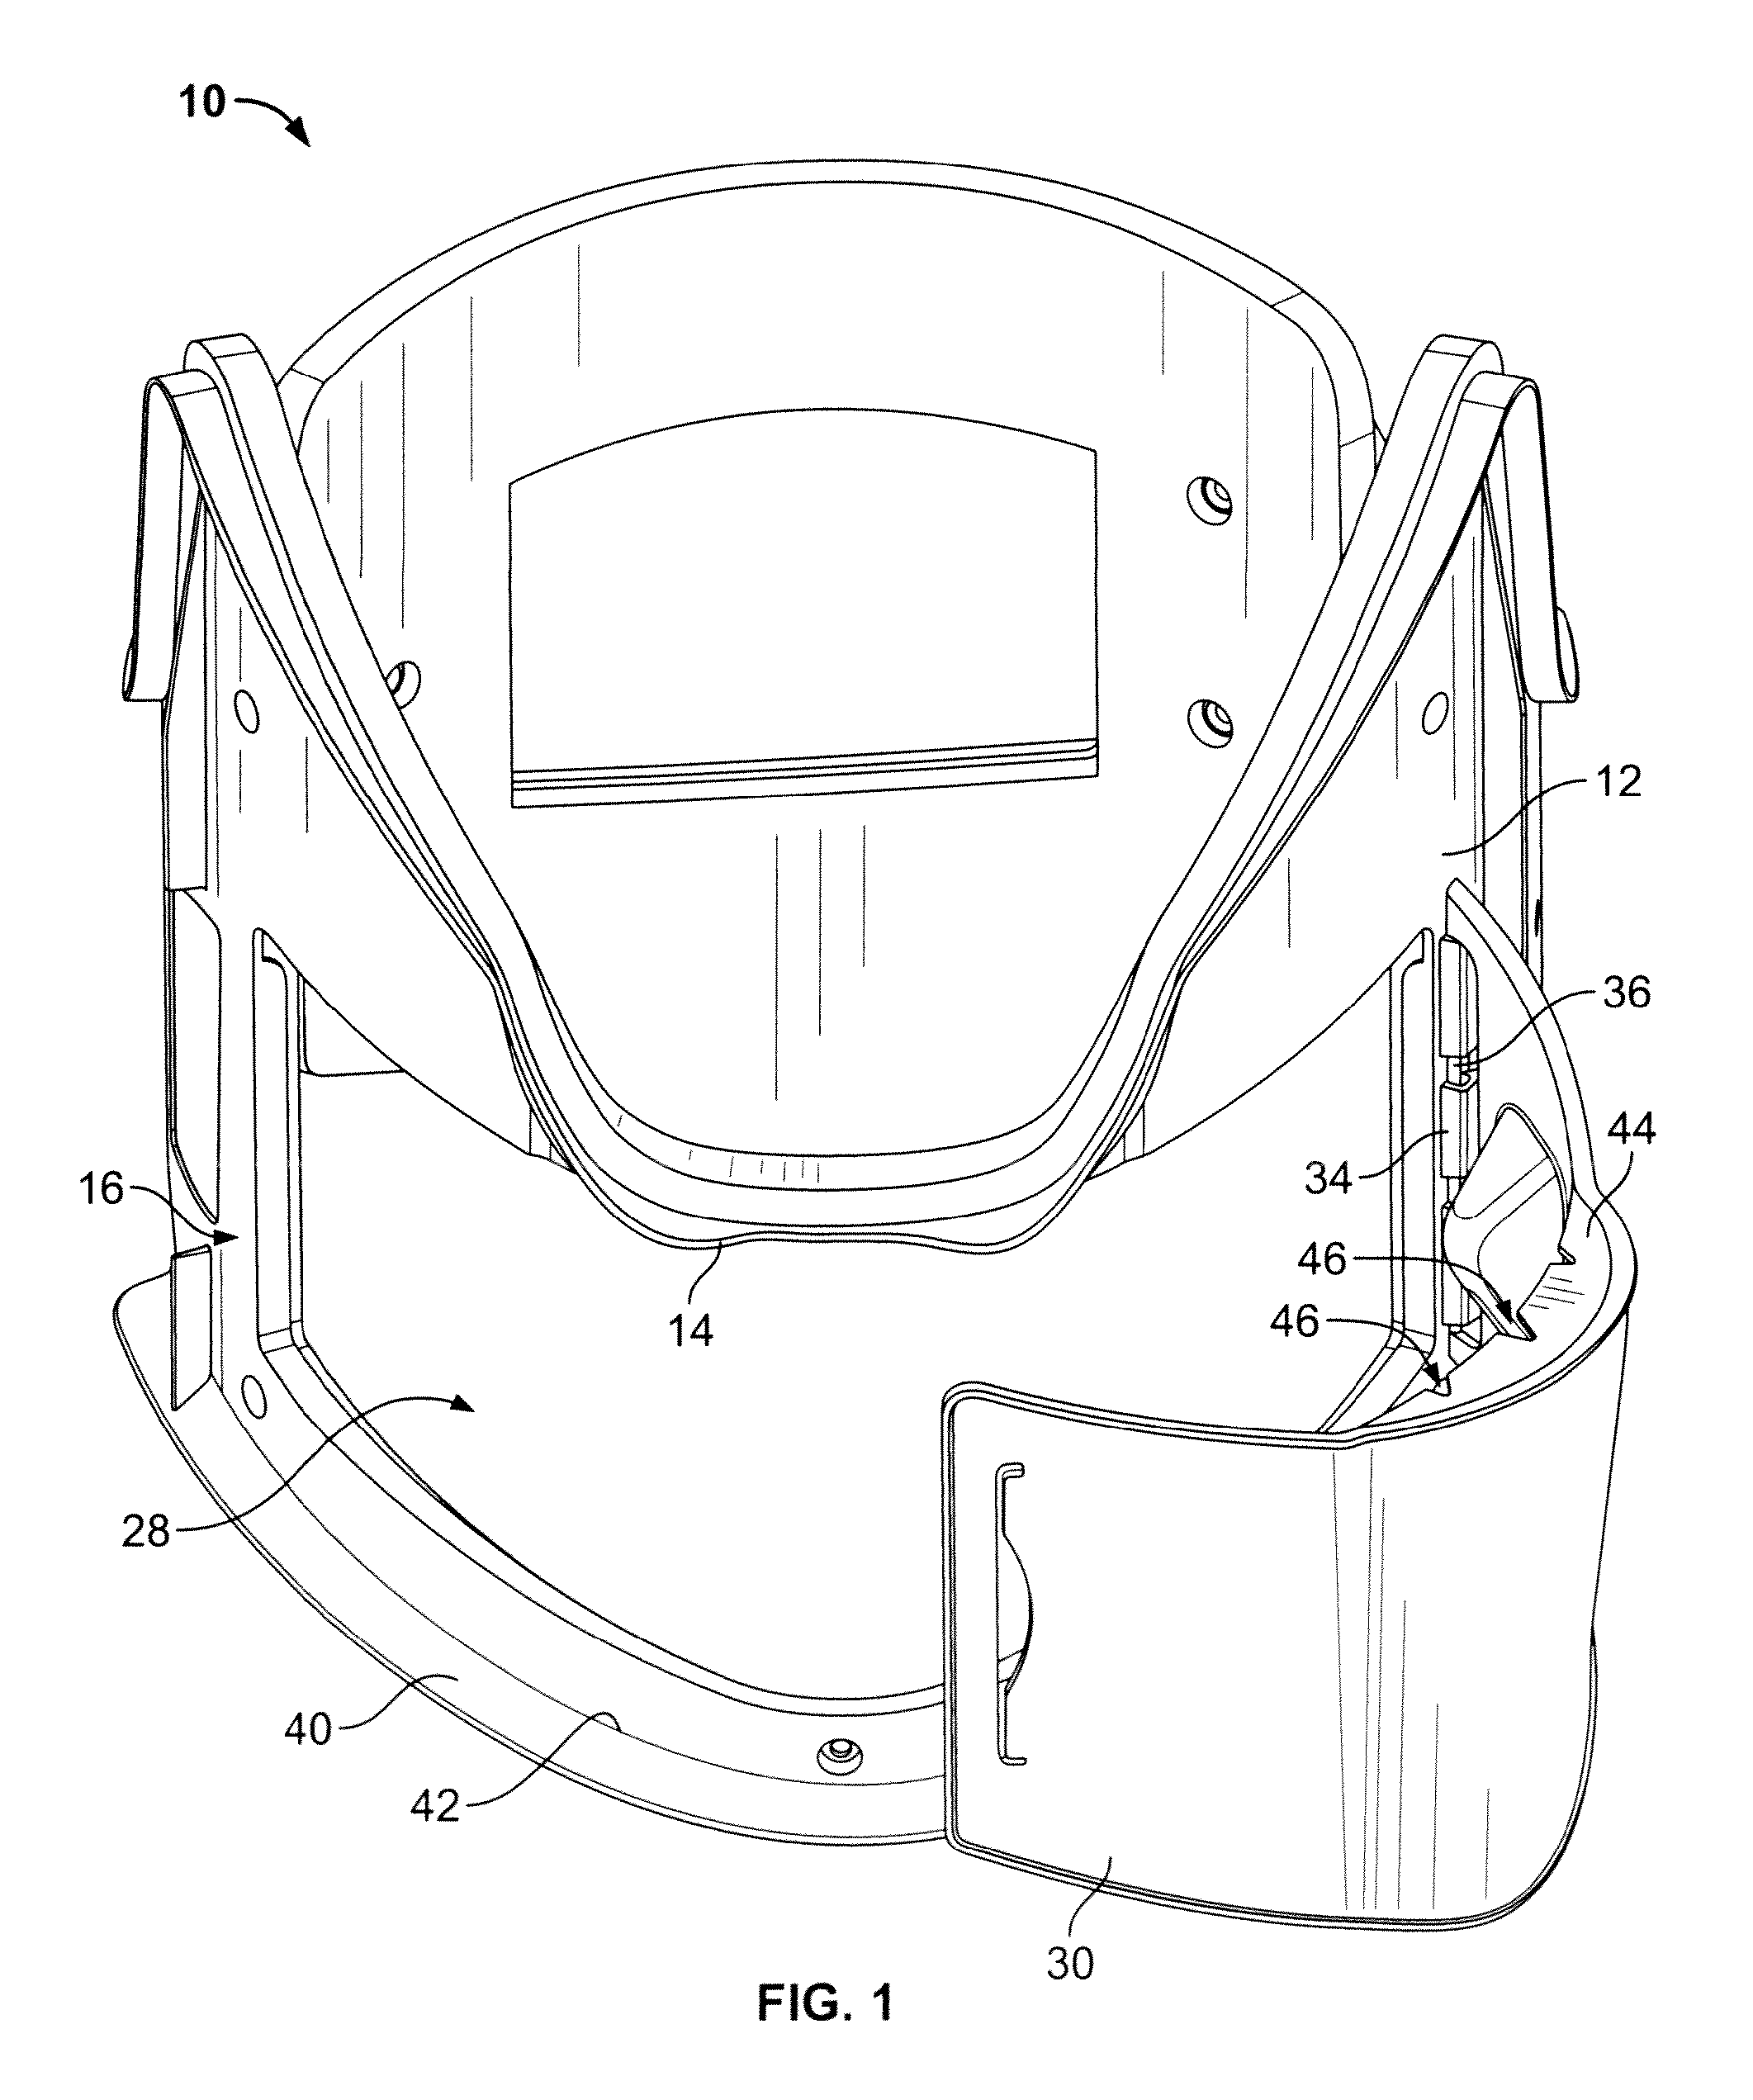 Arterial cooling elements for use with a cervical immobilization collar